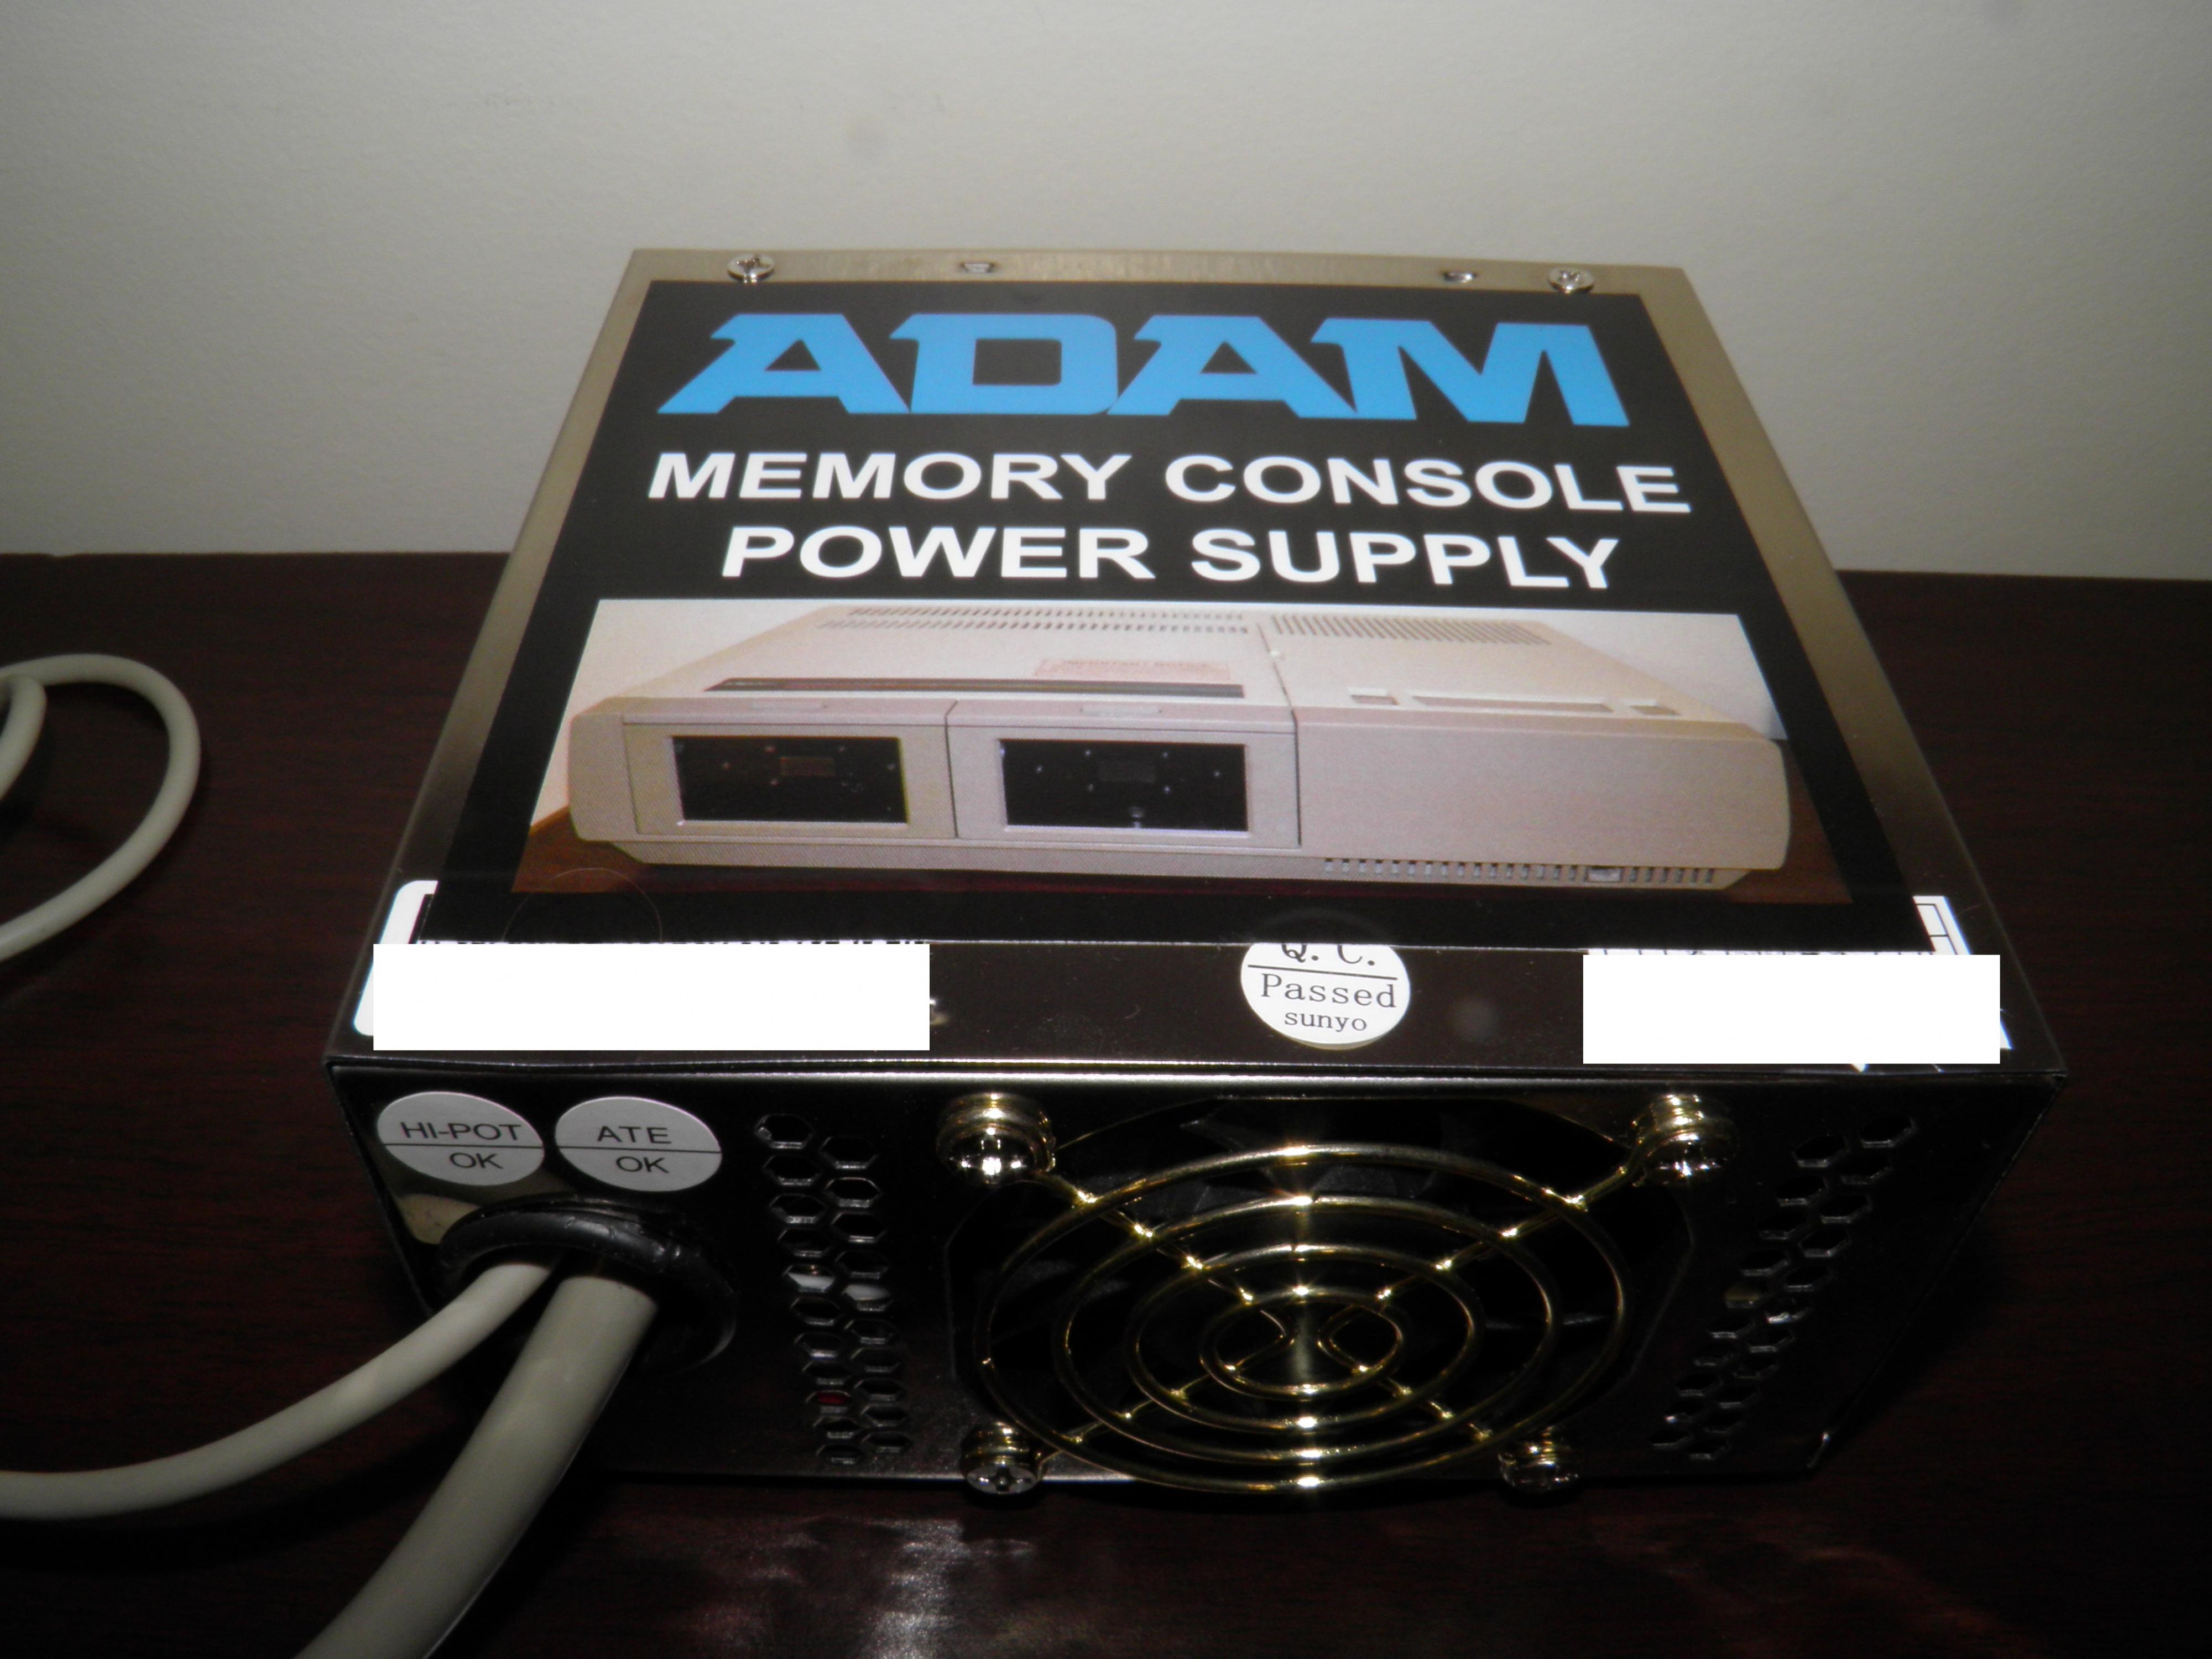 United States 5ft Apollo 400 Watt Power Supply for The Coleco ADAM Computer Memory Console Included in Retail Box